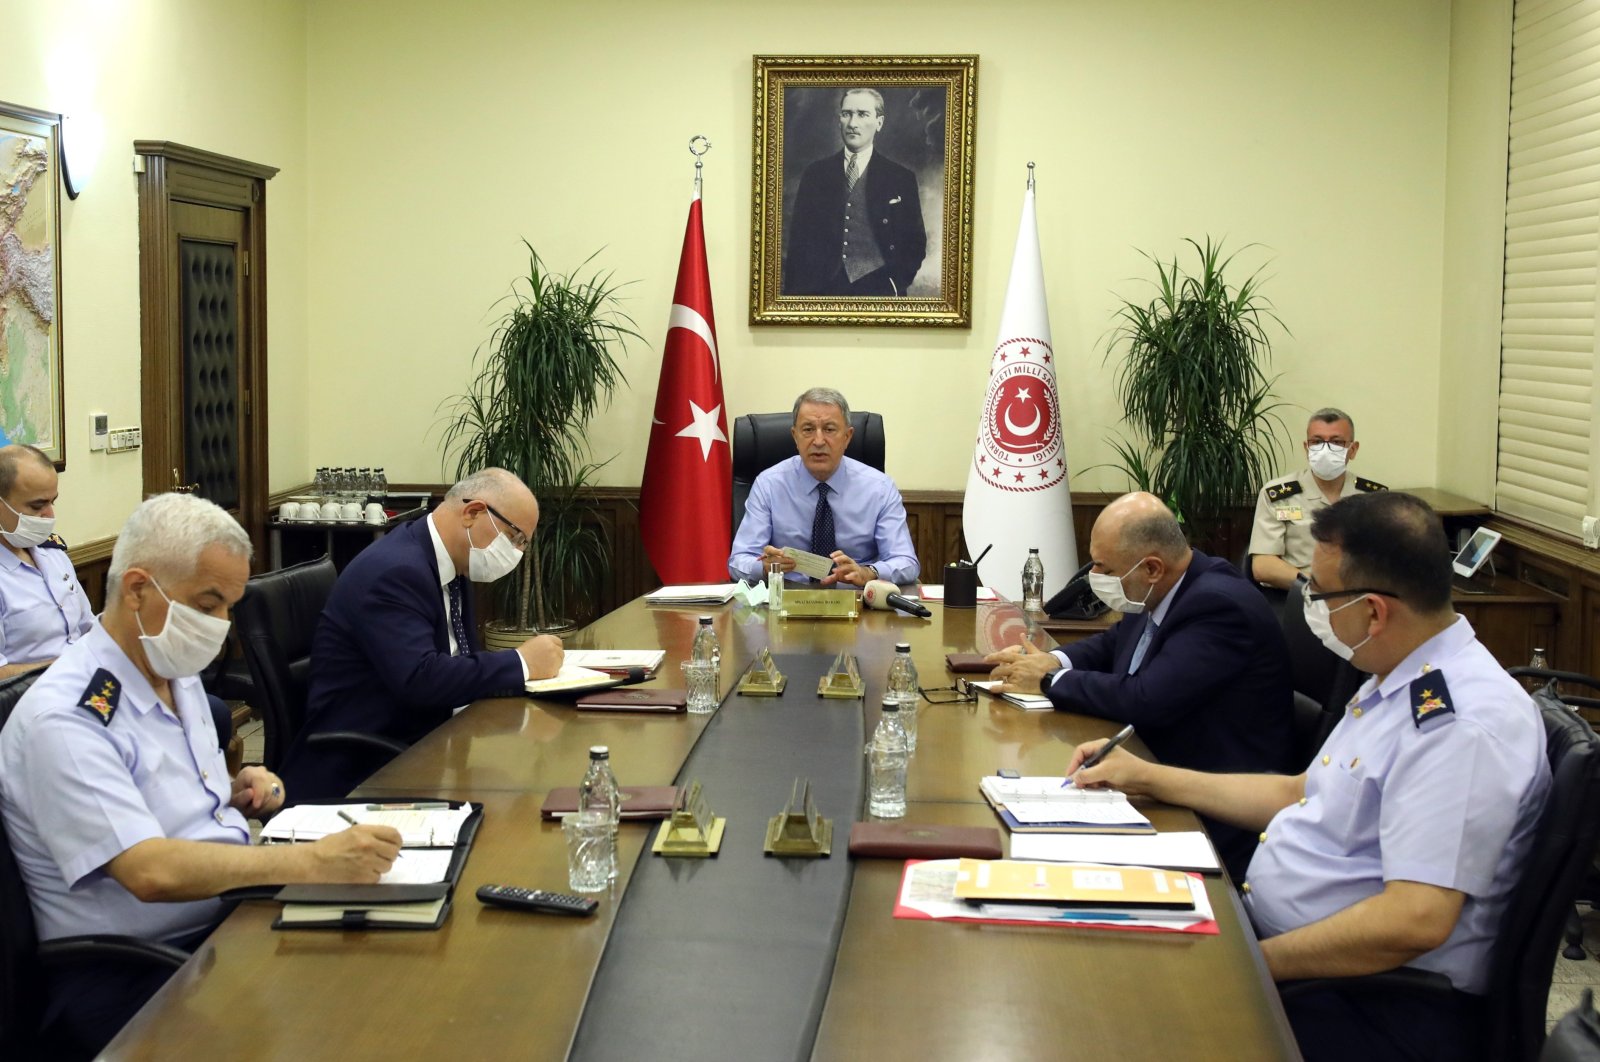 Defense Minister Hulusi Akar attends a meeting with the commanders-in-chief of the Turkish Armed Forces in Ankara, Tuesday, Aug. 11, 2020 (DHA Photo)